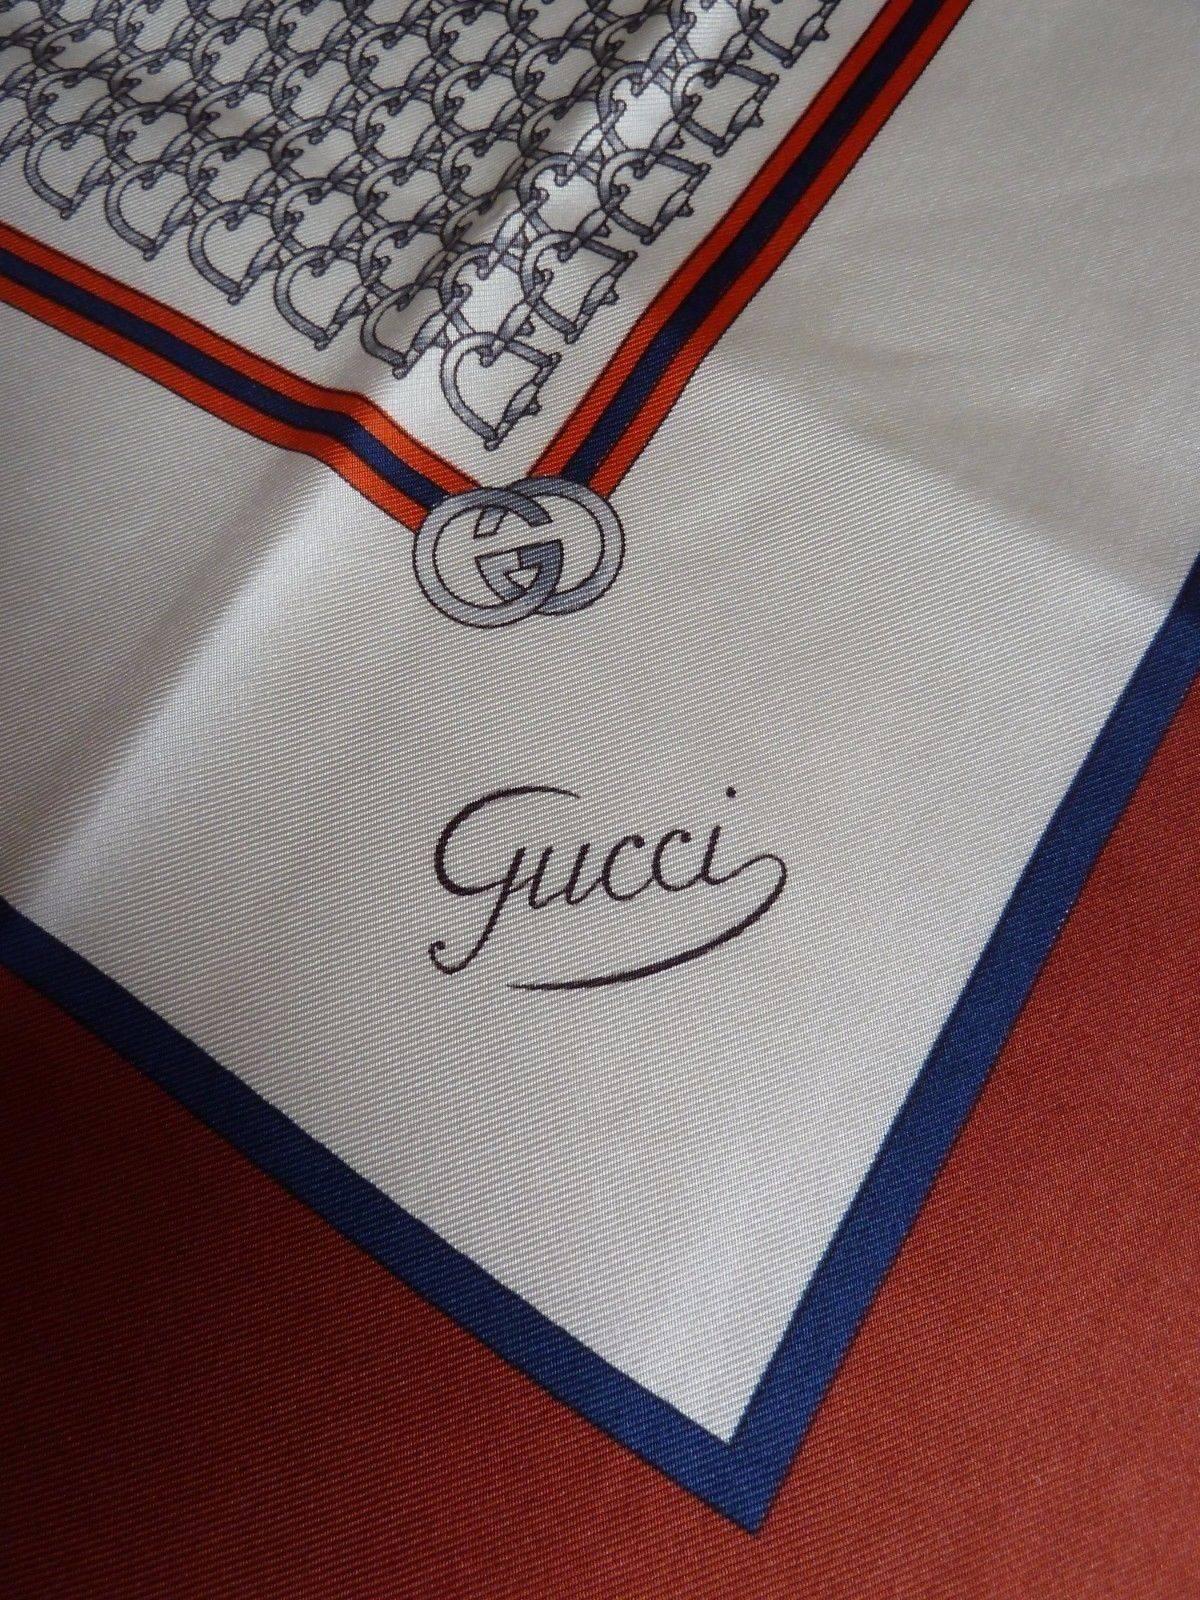 Women's Gucci scarf vintage 1960s made in italy foulard 100% silk 67x67 cm red